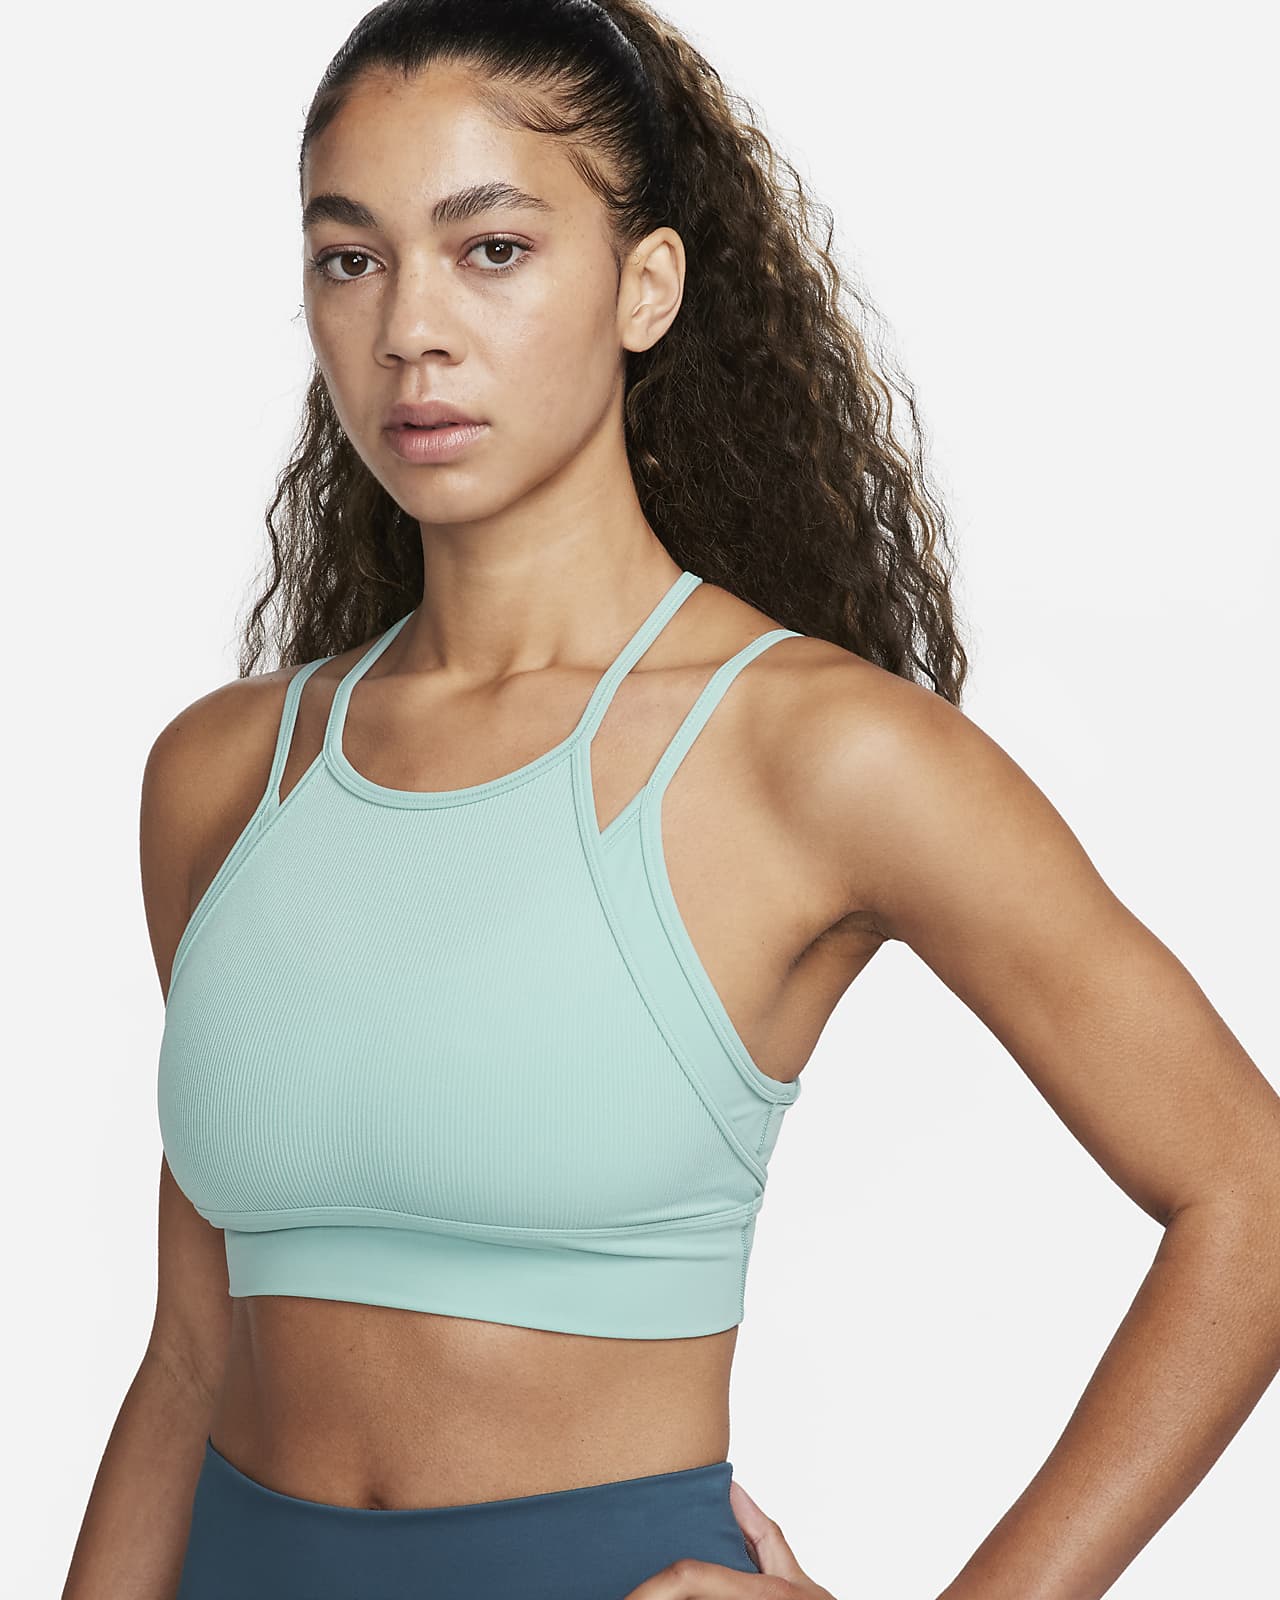 Neck Sports Bra - Nike Dri - nike dunk high for youth girls shoes sale  women - Fit Indy Women's Light - Cheap Lefresnoy Jordan outlet - Support  Padded U